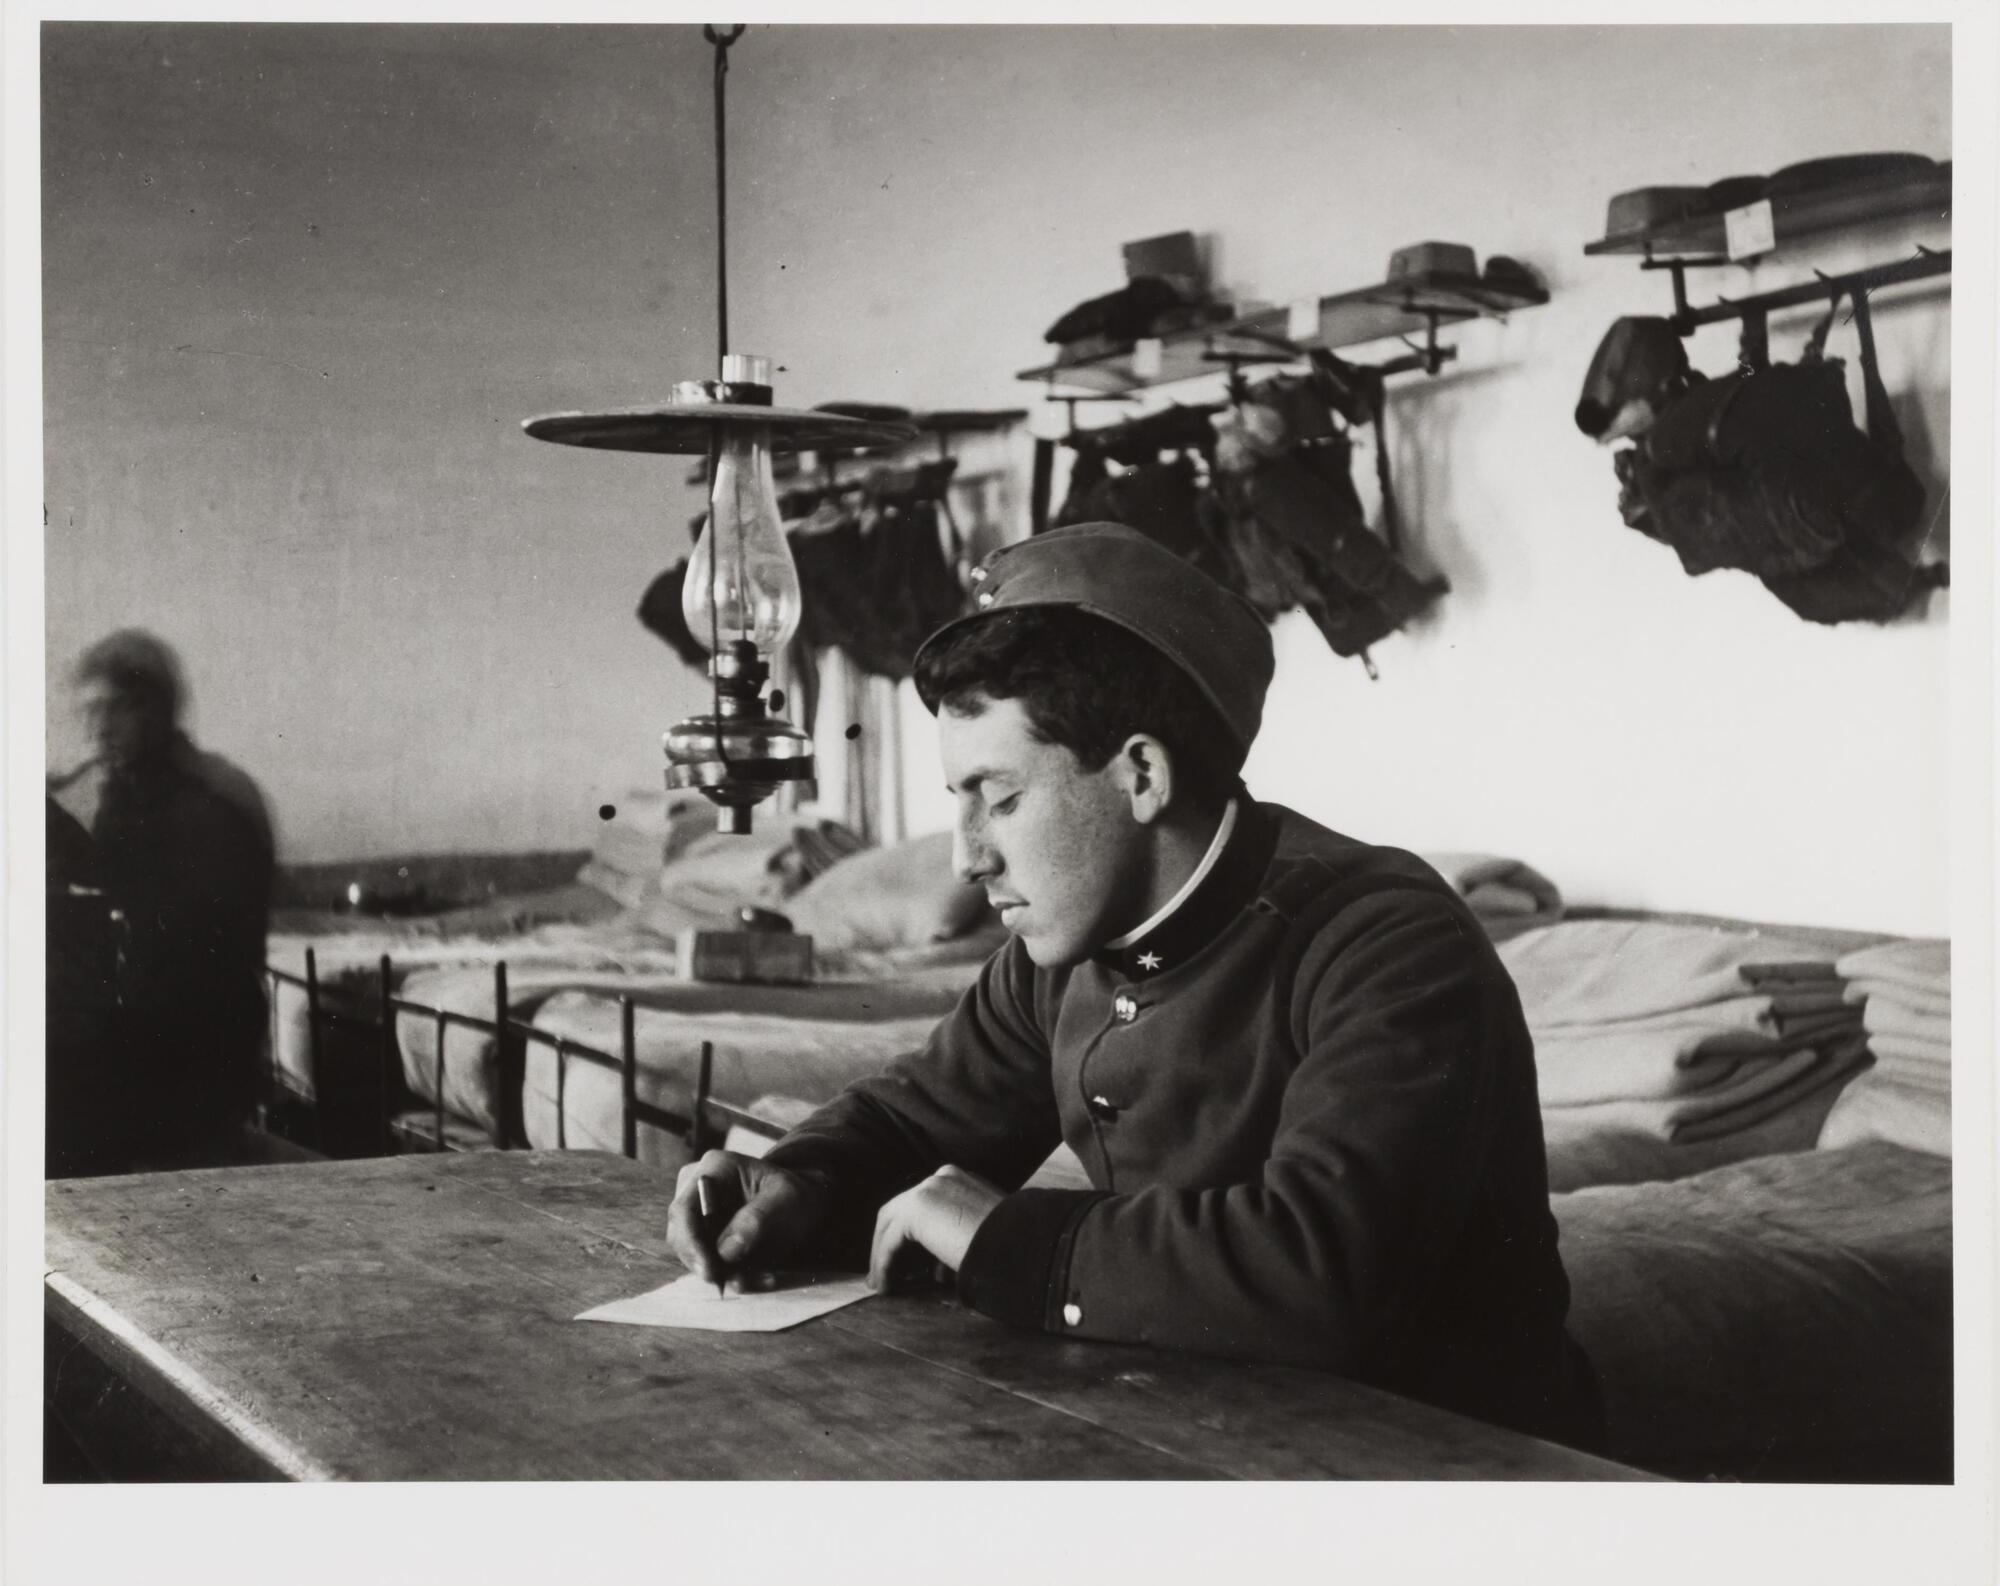 Photograph of a soldier sitting at a desk and writing on a piece of paper.